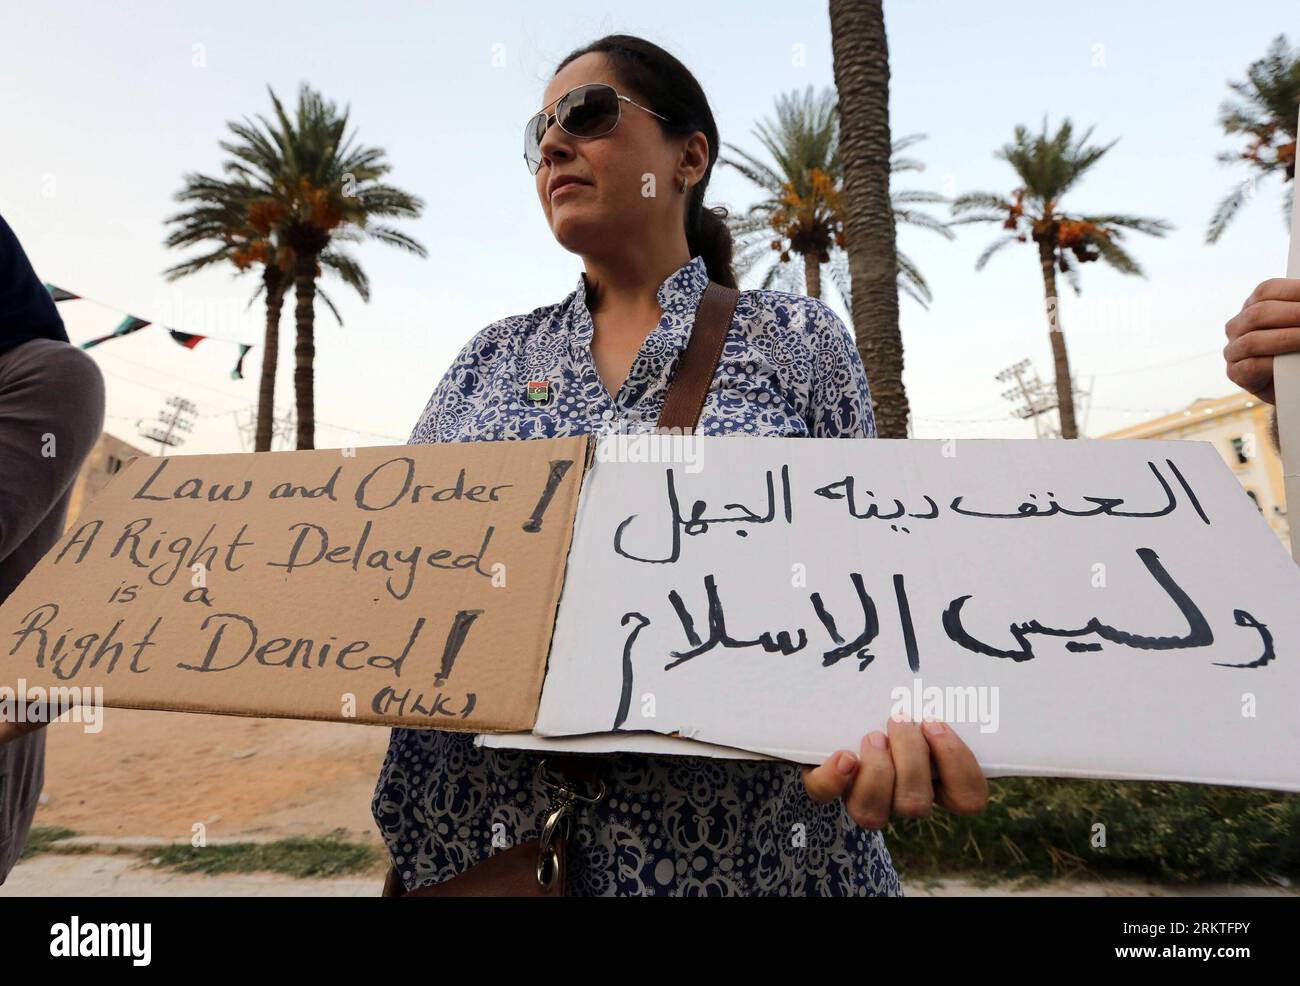 Bildnummer: 58468962  Datum: 13.09.2012  Copyright: imago/Xinhua (120913) -- TRIPOLI, Sept. 13, 2012 (Xinhua) -- A Libyan woman takes part in a protest against the killing of U.S. Ambassador to Libya and others in Benghazi at Martyrs Square in Tripoli, Libya, Sept. 13, 2012. (Xinhua/Hamza Turkia) LIBYA-TRIPOLI-US-UNREST-PROTEST PUBLICATIONxNOTxINxCHN Politik Demo Protest Ermordung USA Botschafter xjh x0x premiumd 2012 quer      58468962 Date 13 09 2012 Copyright Imago XINHUA  Tripoli Sept 13 2012 XINHUA a Libyan Woman Takes Part in a Protest against The Killing of U S Ambassador to Libya and O Stock Photo